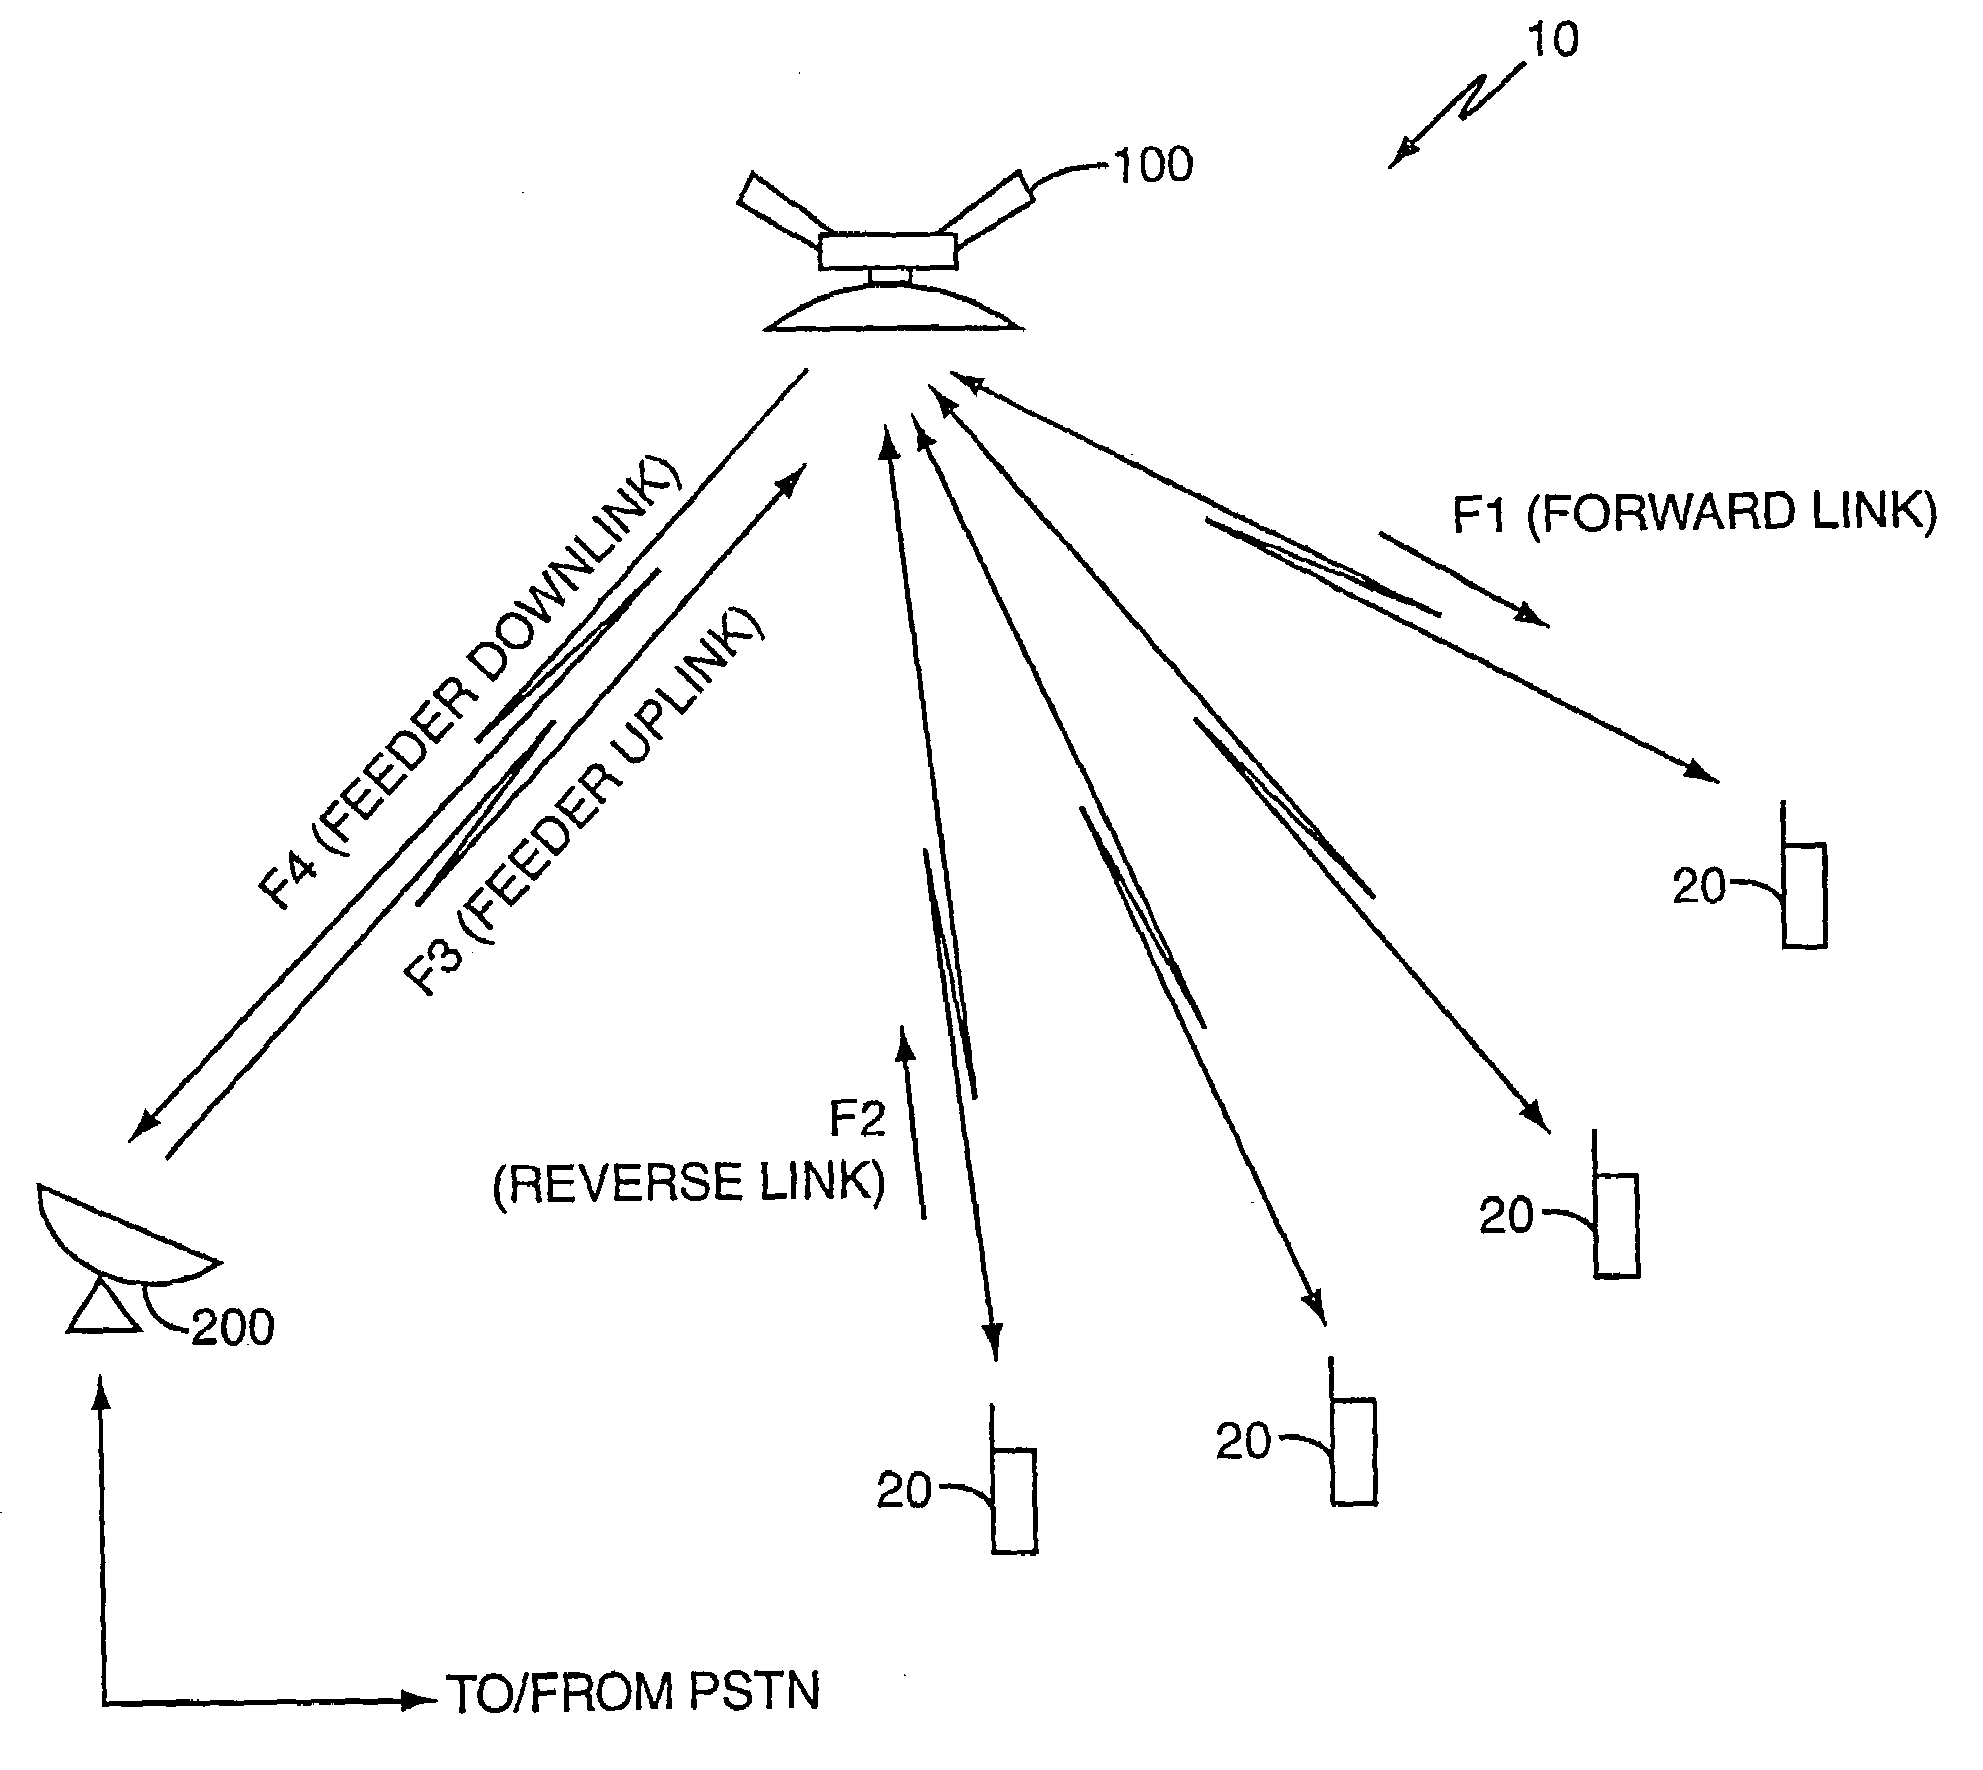 Satellite communications system using multiple earth stations